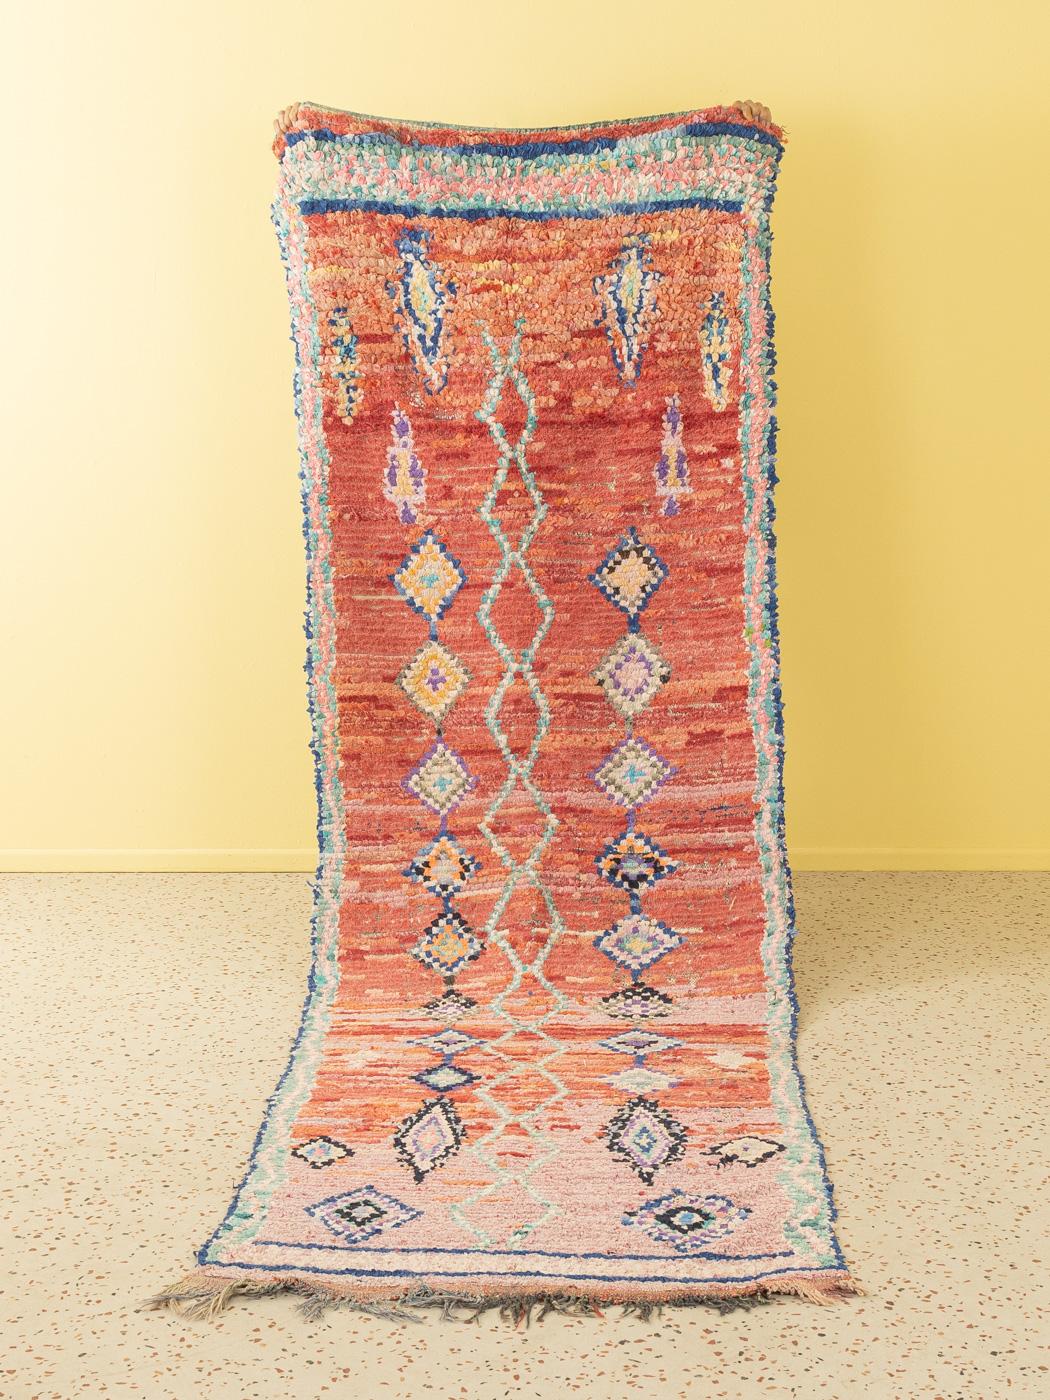 This Azilal is a vintage wool rug with some recycled textile parts – thick and soft, comfortable underfoot. Our Berber rugs are handmade, one knot at a time. Each of our Berber rugs is a long-lasting one-of-a-kind piece, created in a sustainable